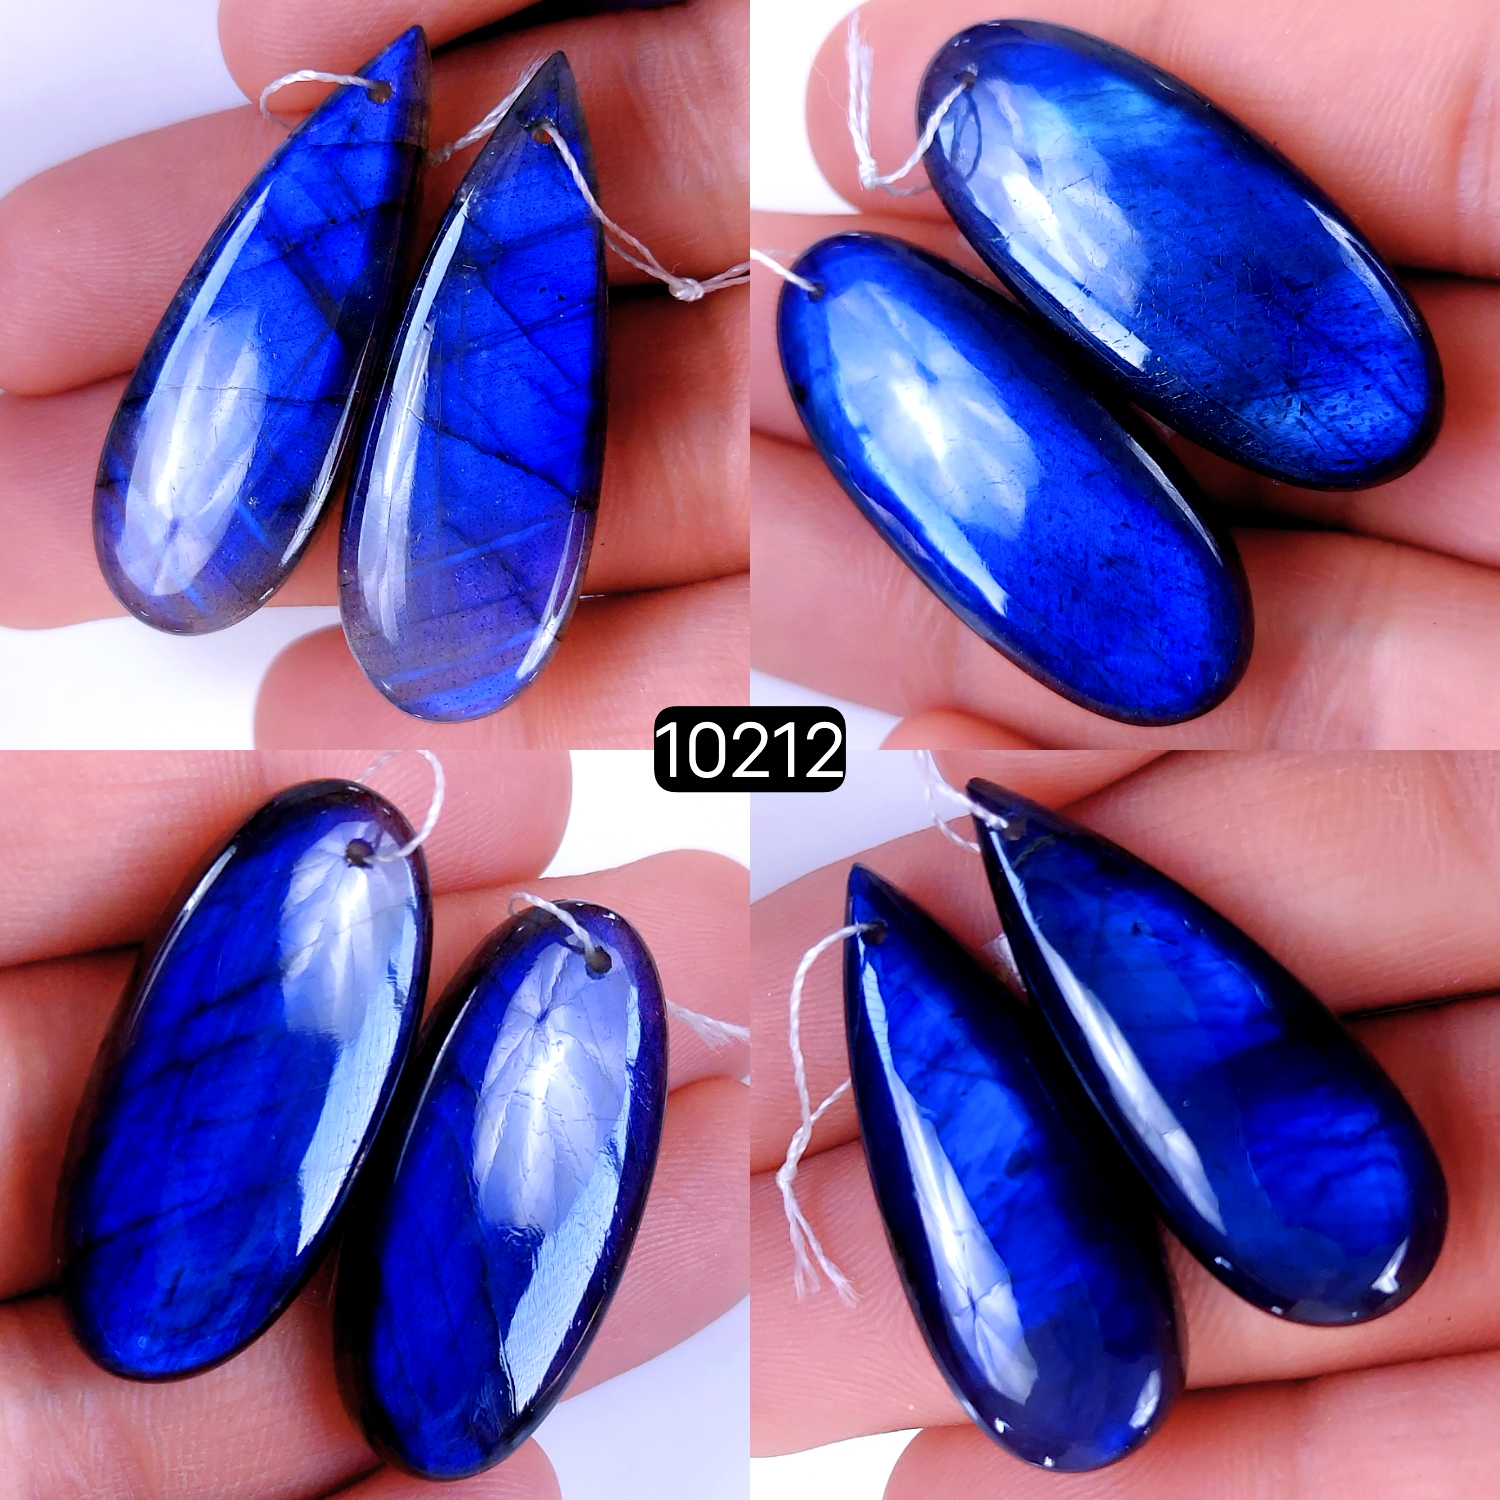 4Pair 201Cts Natural Labradorite Crystal Drill Dangle Drop Earring Pairs Silver Earrings Blue Labradorite Hoop Jewelry  40x15 36x16mm #10212